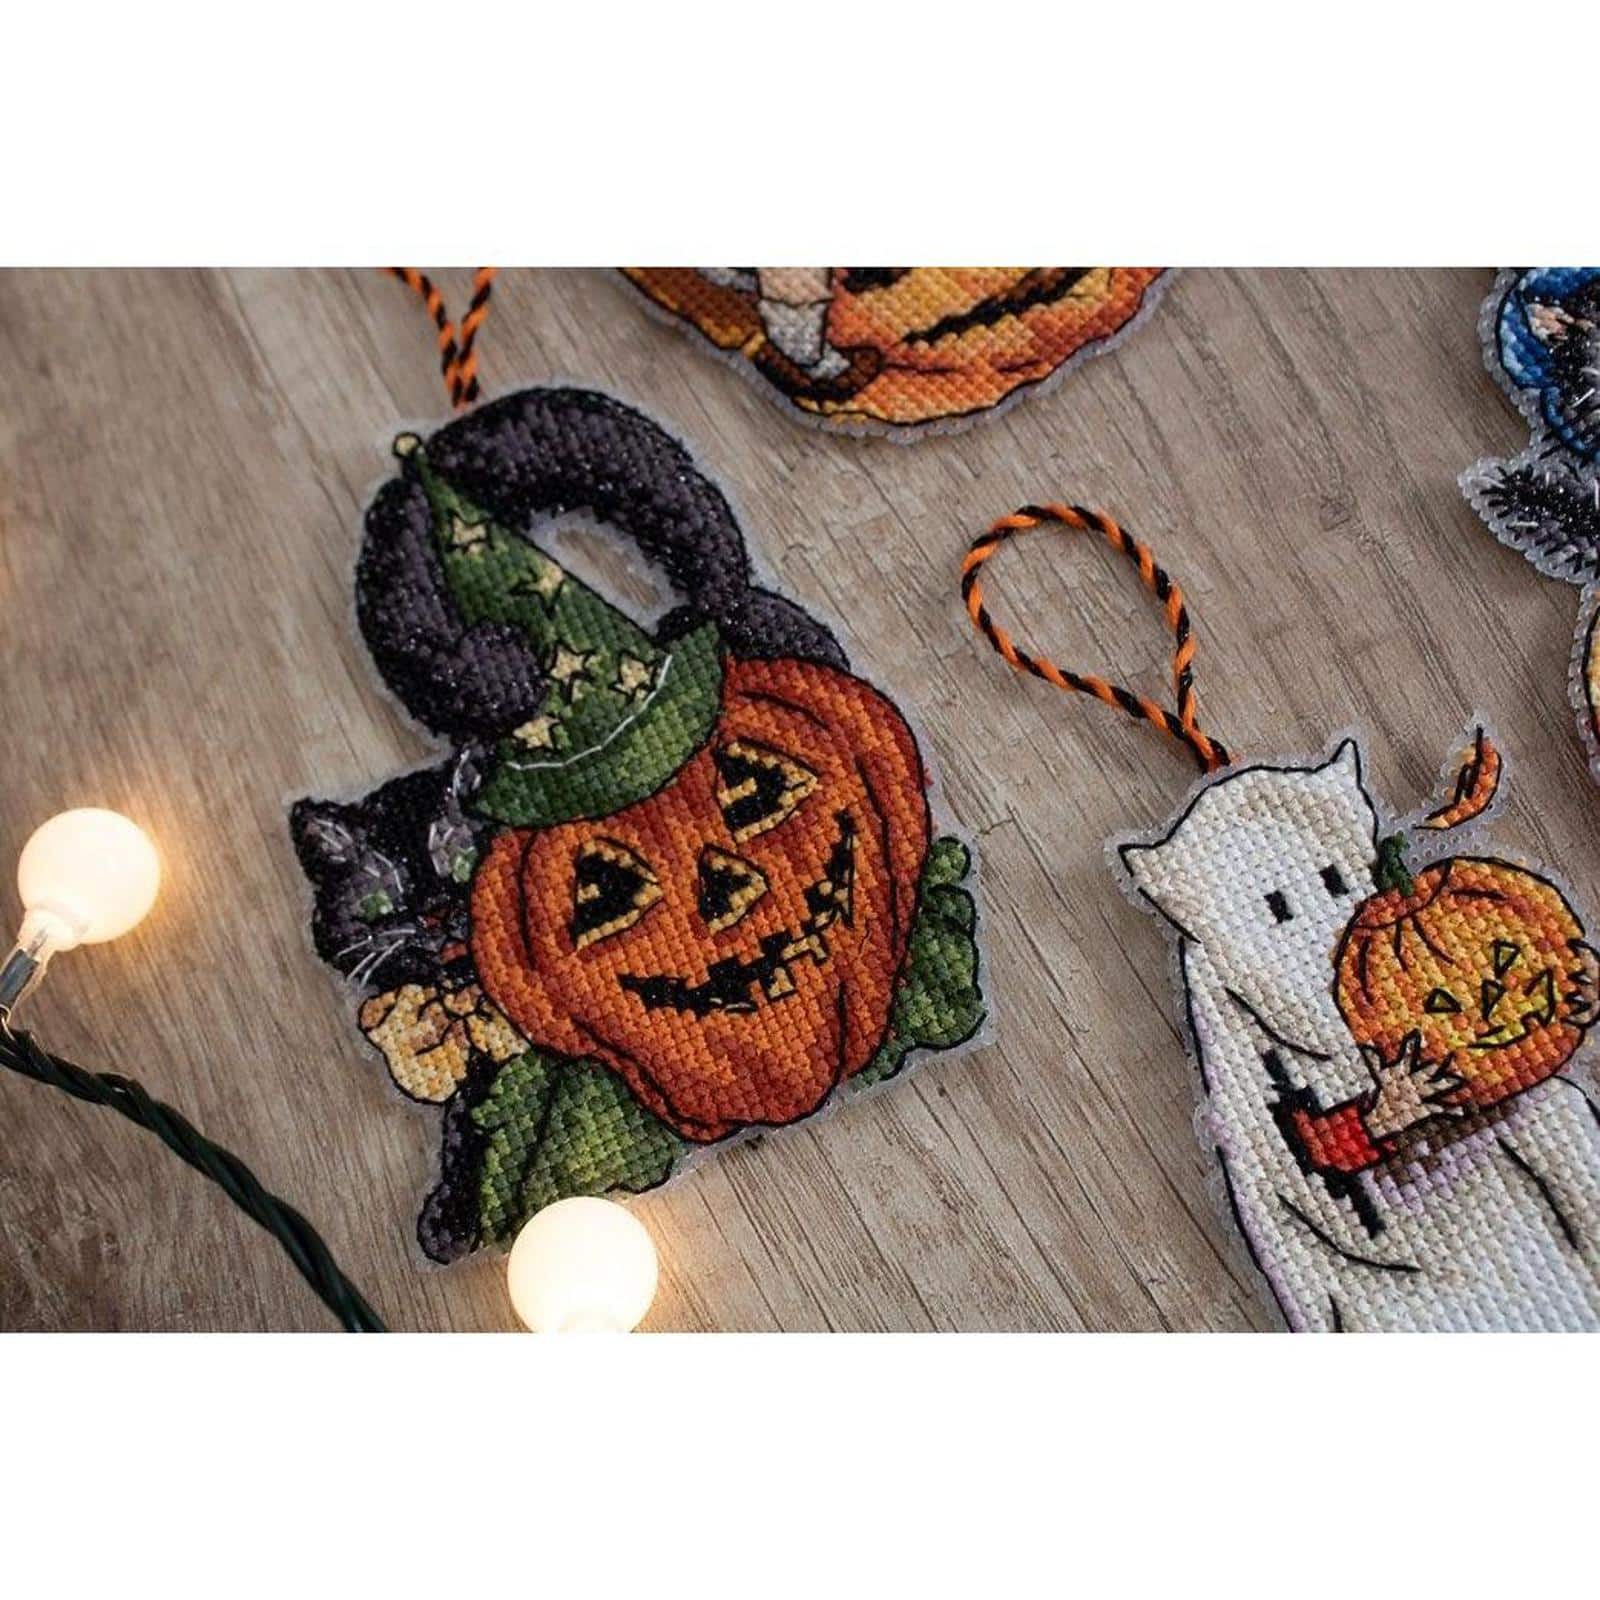 Letistitch Halloween Toys Plastic Canvas Counted Cross Stitch Kit